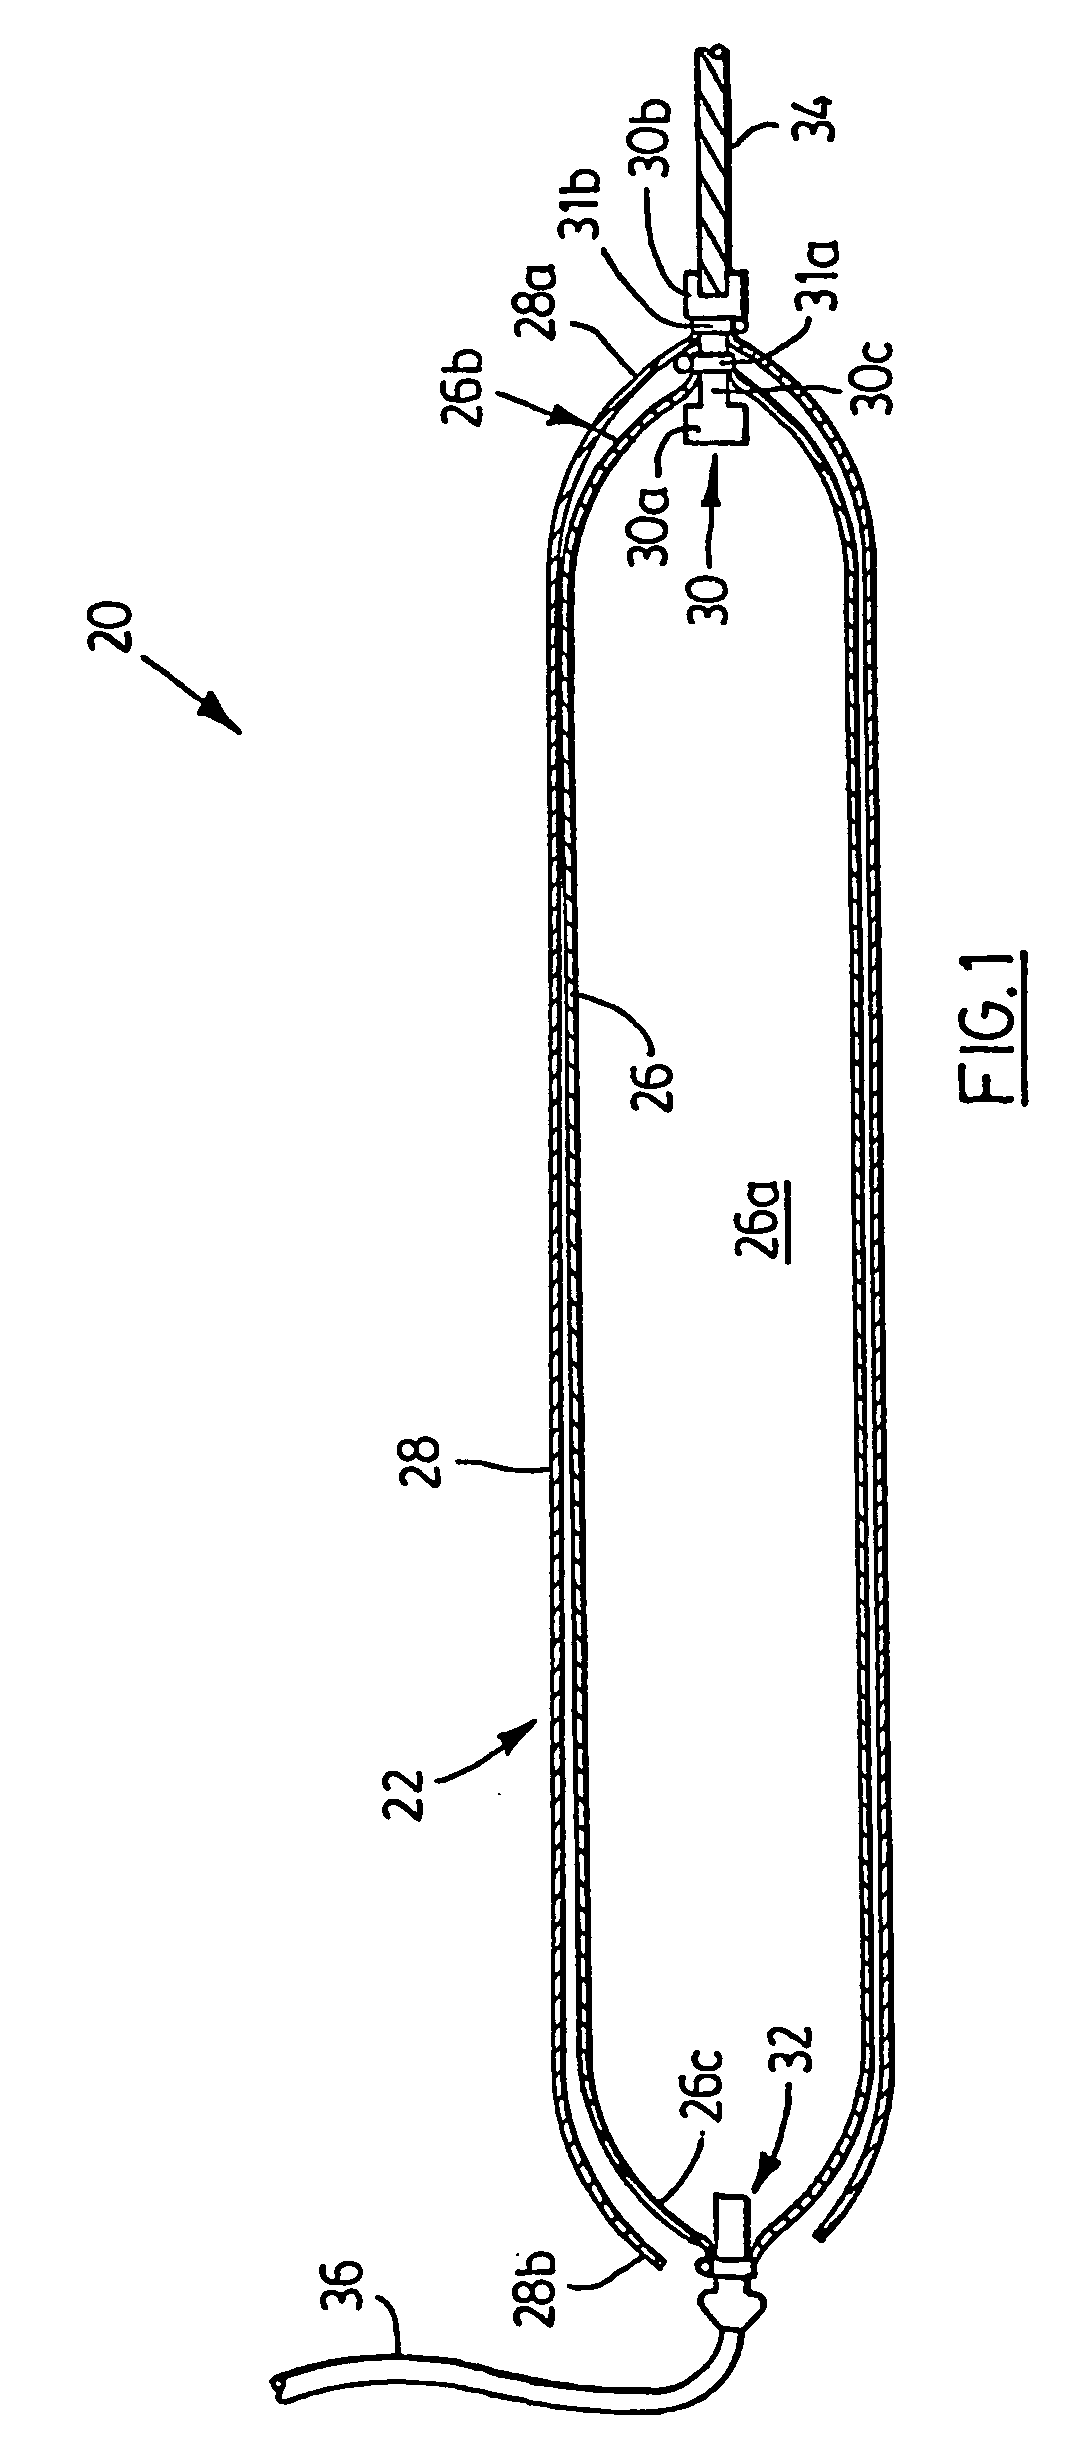 Installation assemblies for pipeline liners, pipeline liners and methods for installing the same